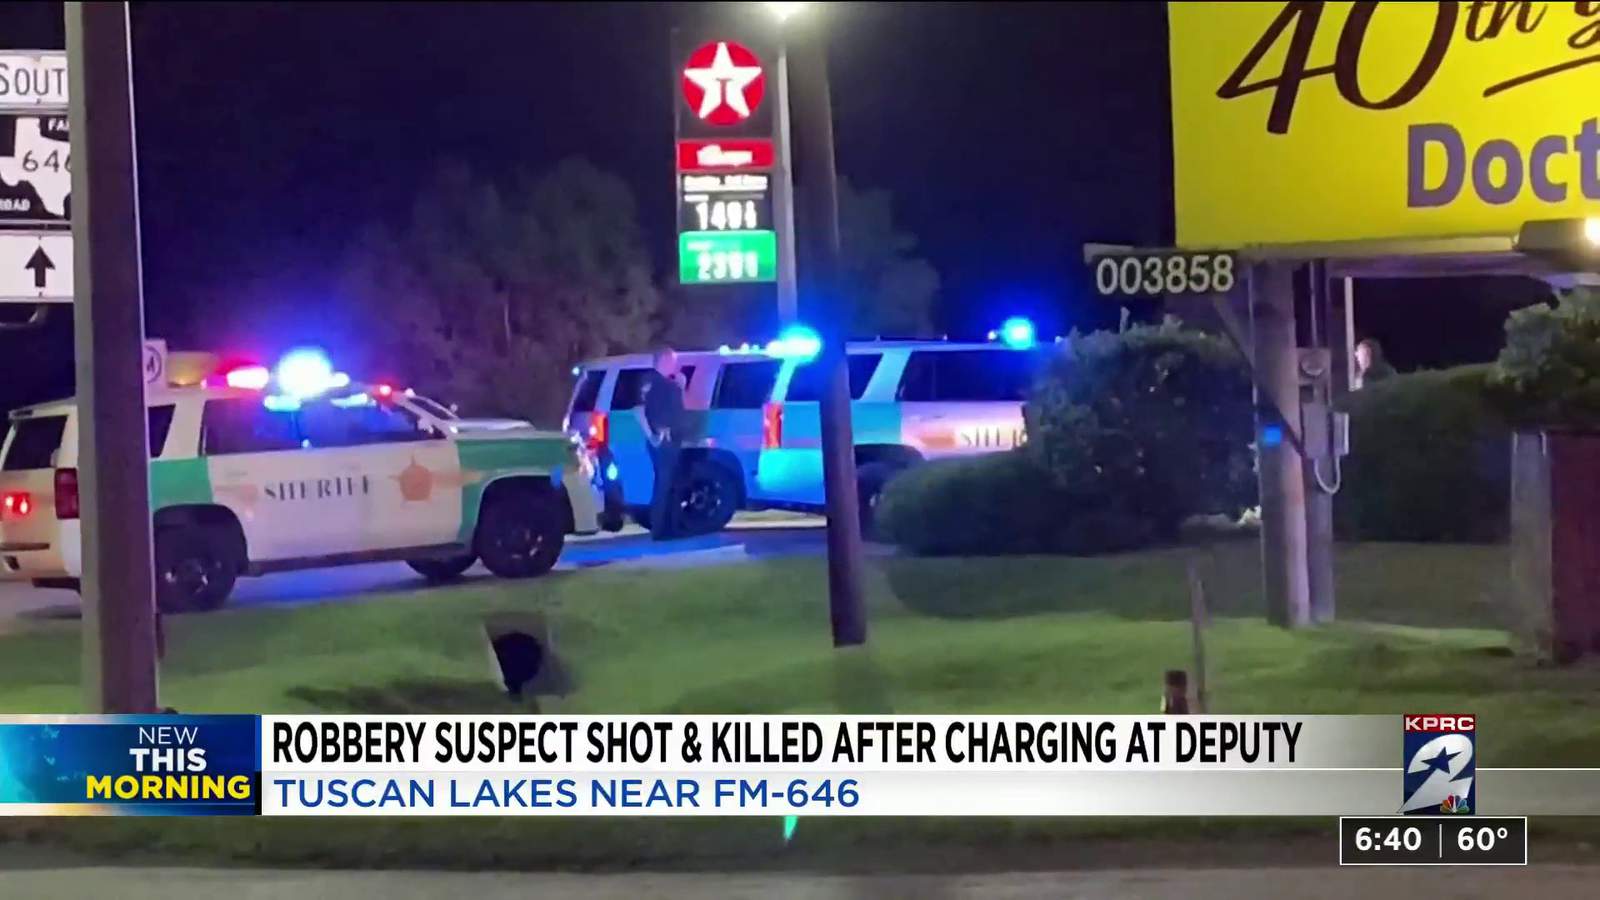 Robbery suspect shot, killed after charging at deputy in League City, authorities say